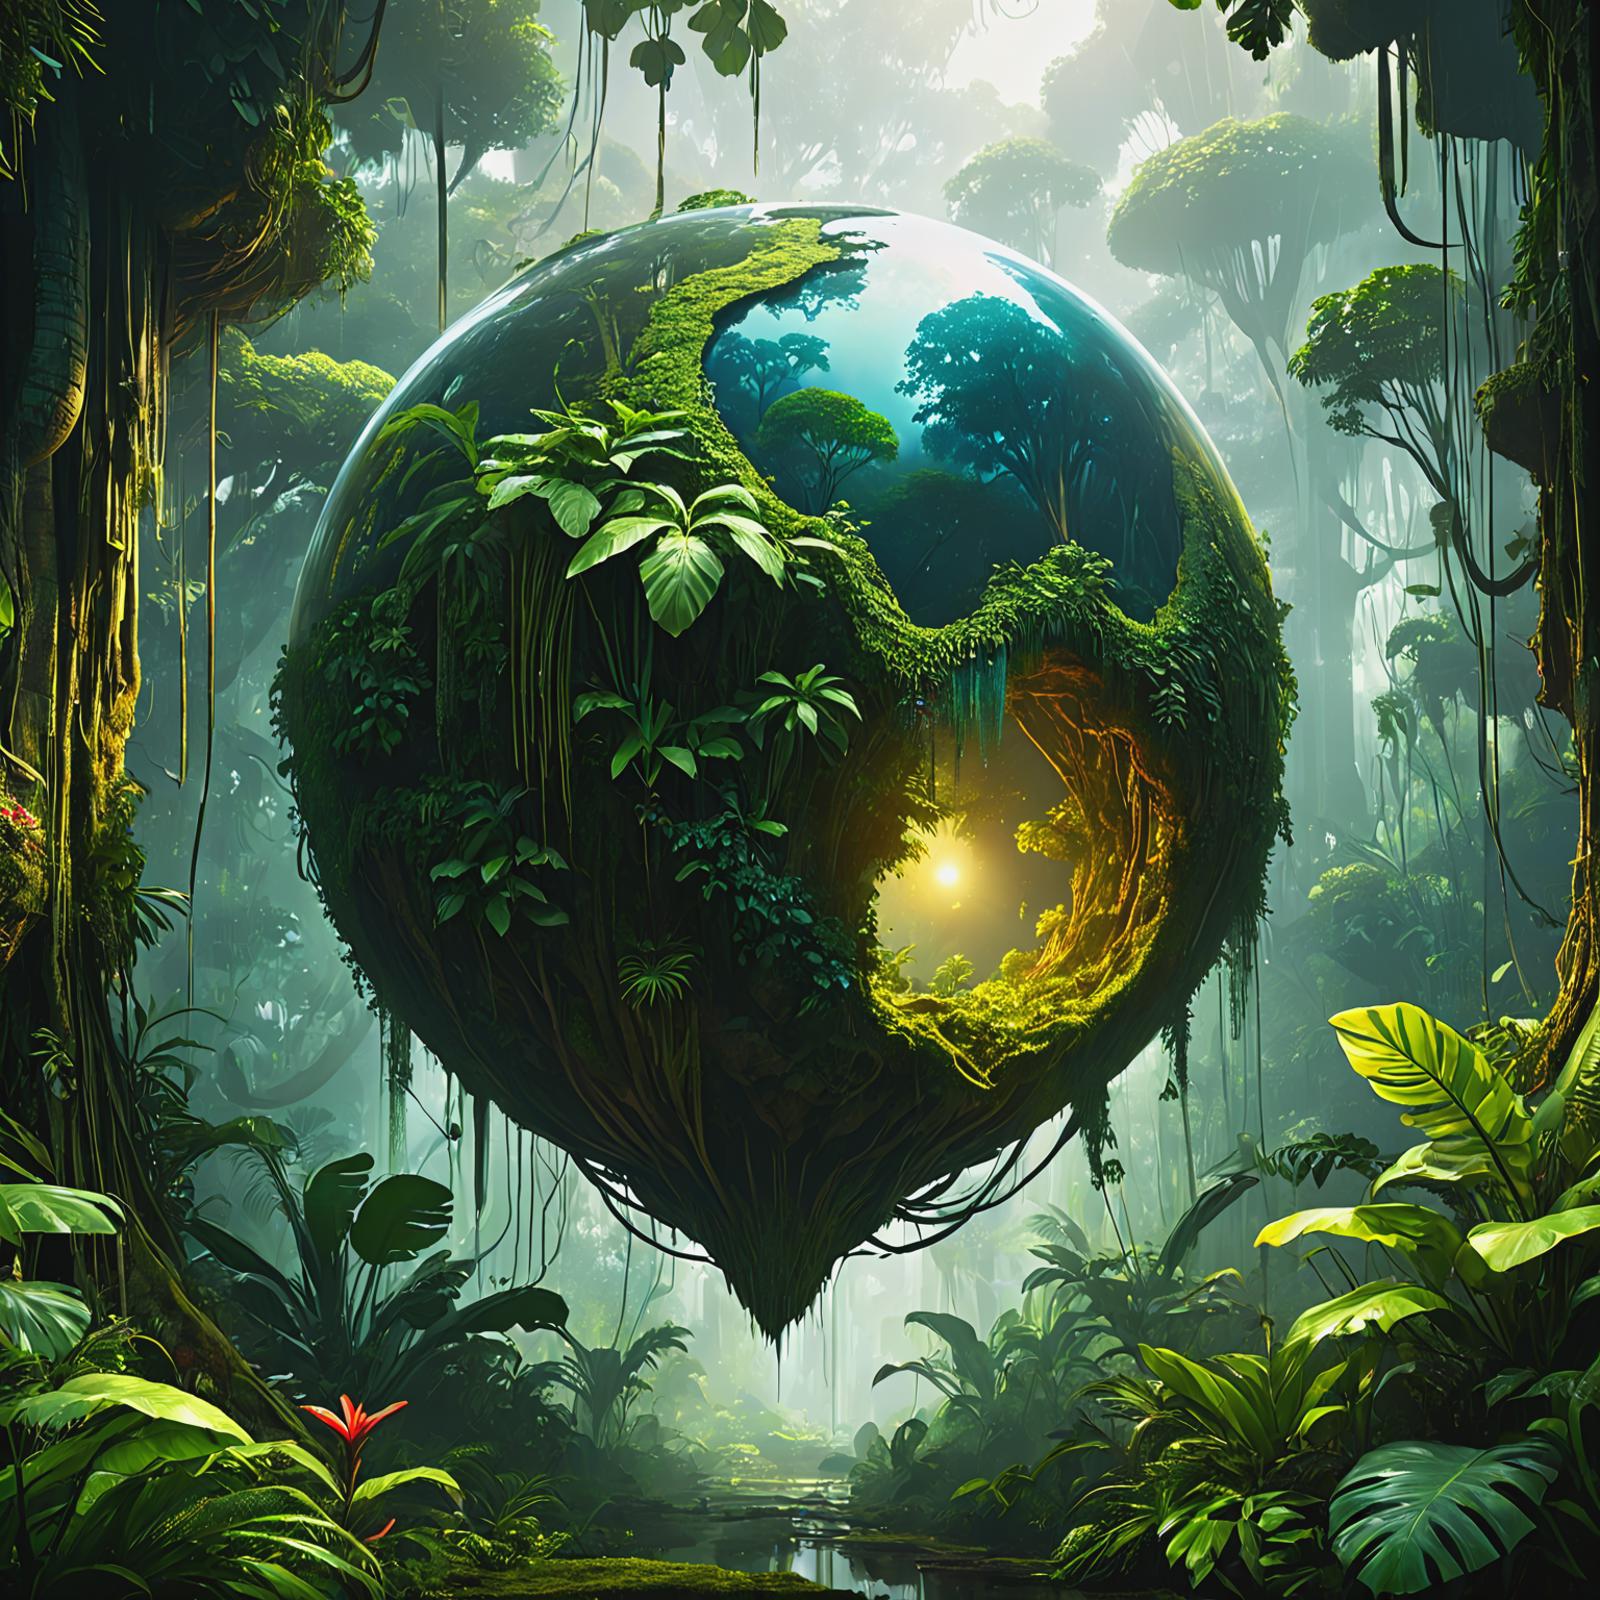 A Planet Earth Artwork with a Heart Shaped Tree in the Center